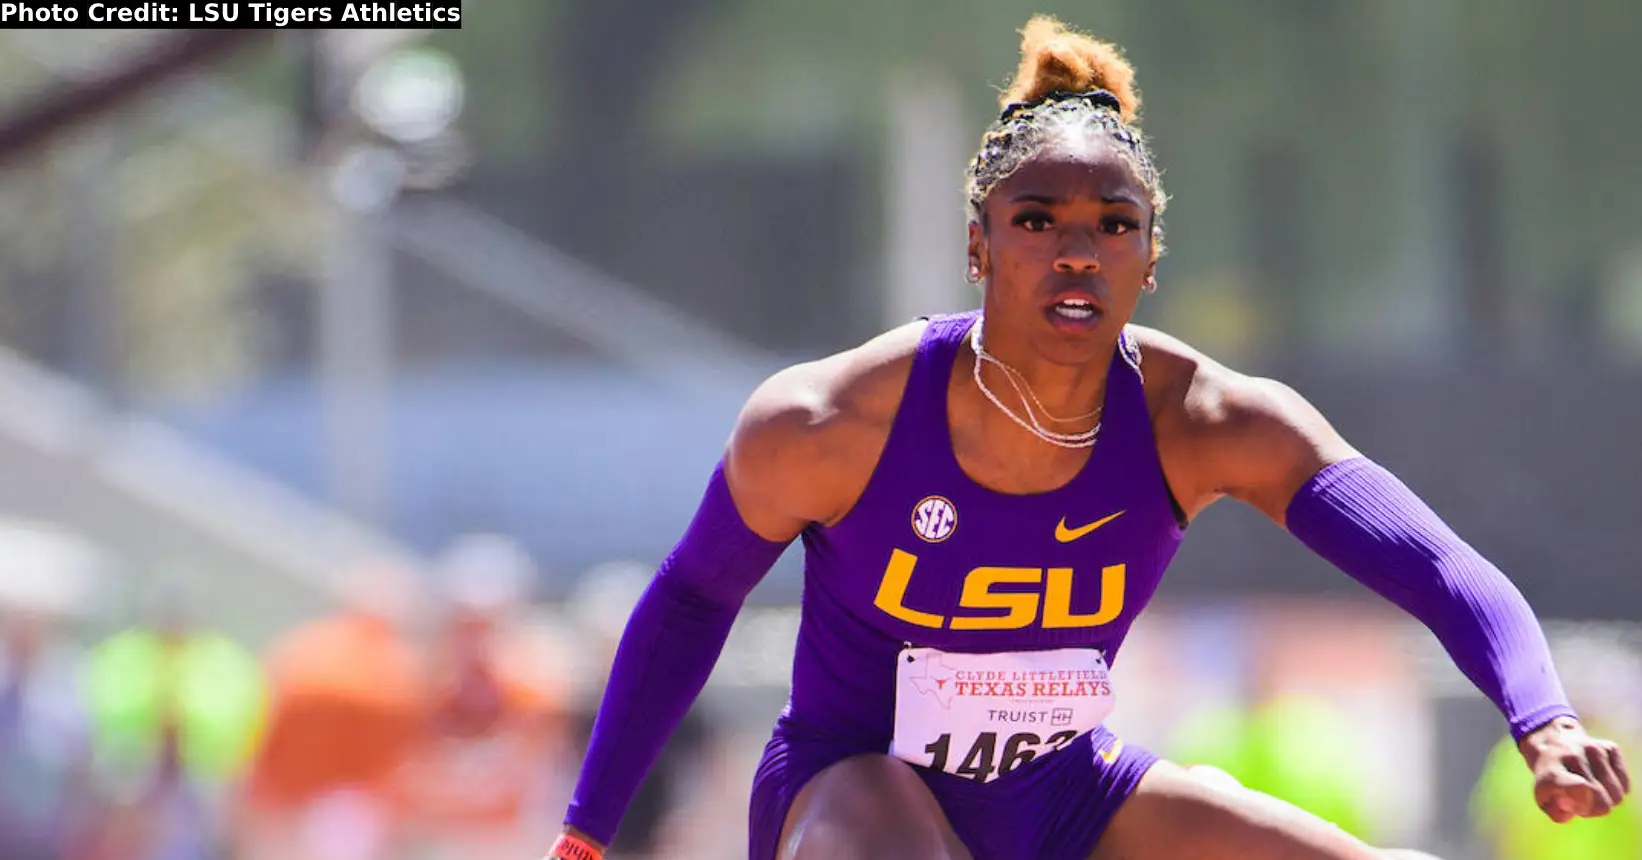 Alia Armstrong of LSU in the women's 100m hurdles